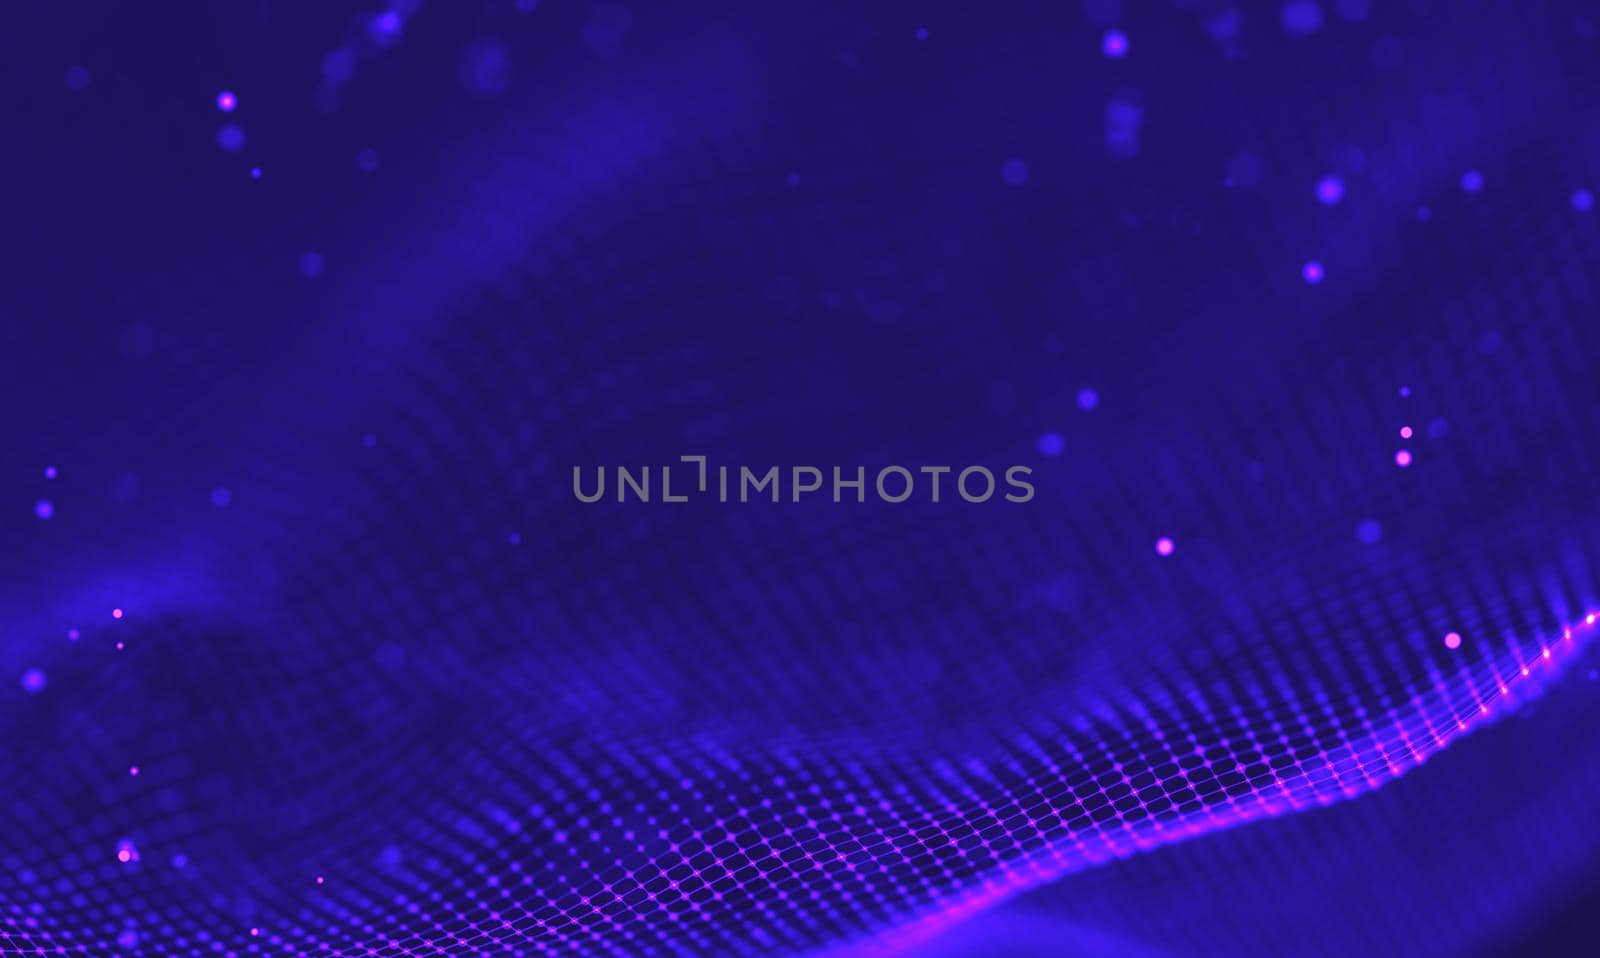 Abstract futuristic illustration of polygonal surface. Low poly shape with connecting dots and lines on dark background. 3D rendering